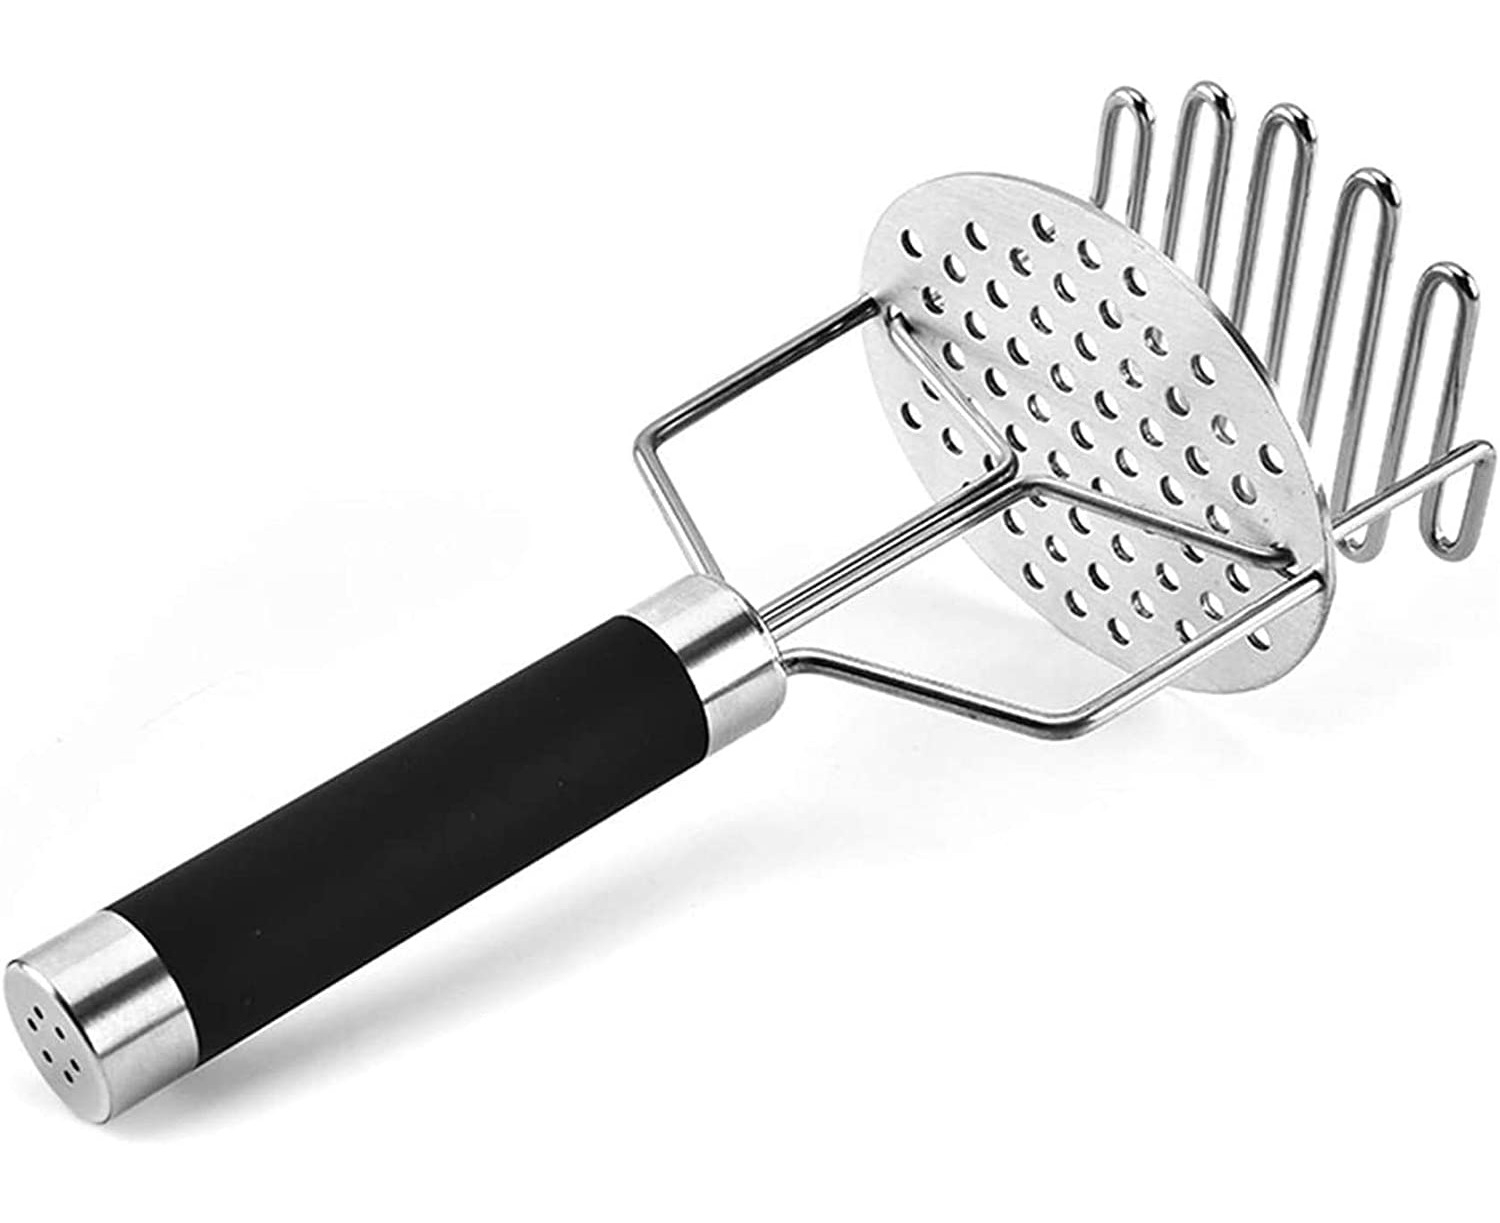 Red UPKOCH Fine Mesh Stainless Steel Strainers Kitchen Sieves with Plastic Handles for Cooking Baking Size L 20cm 